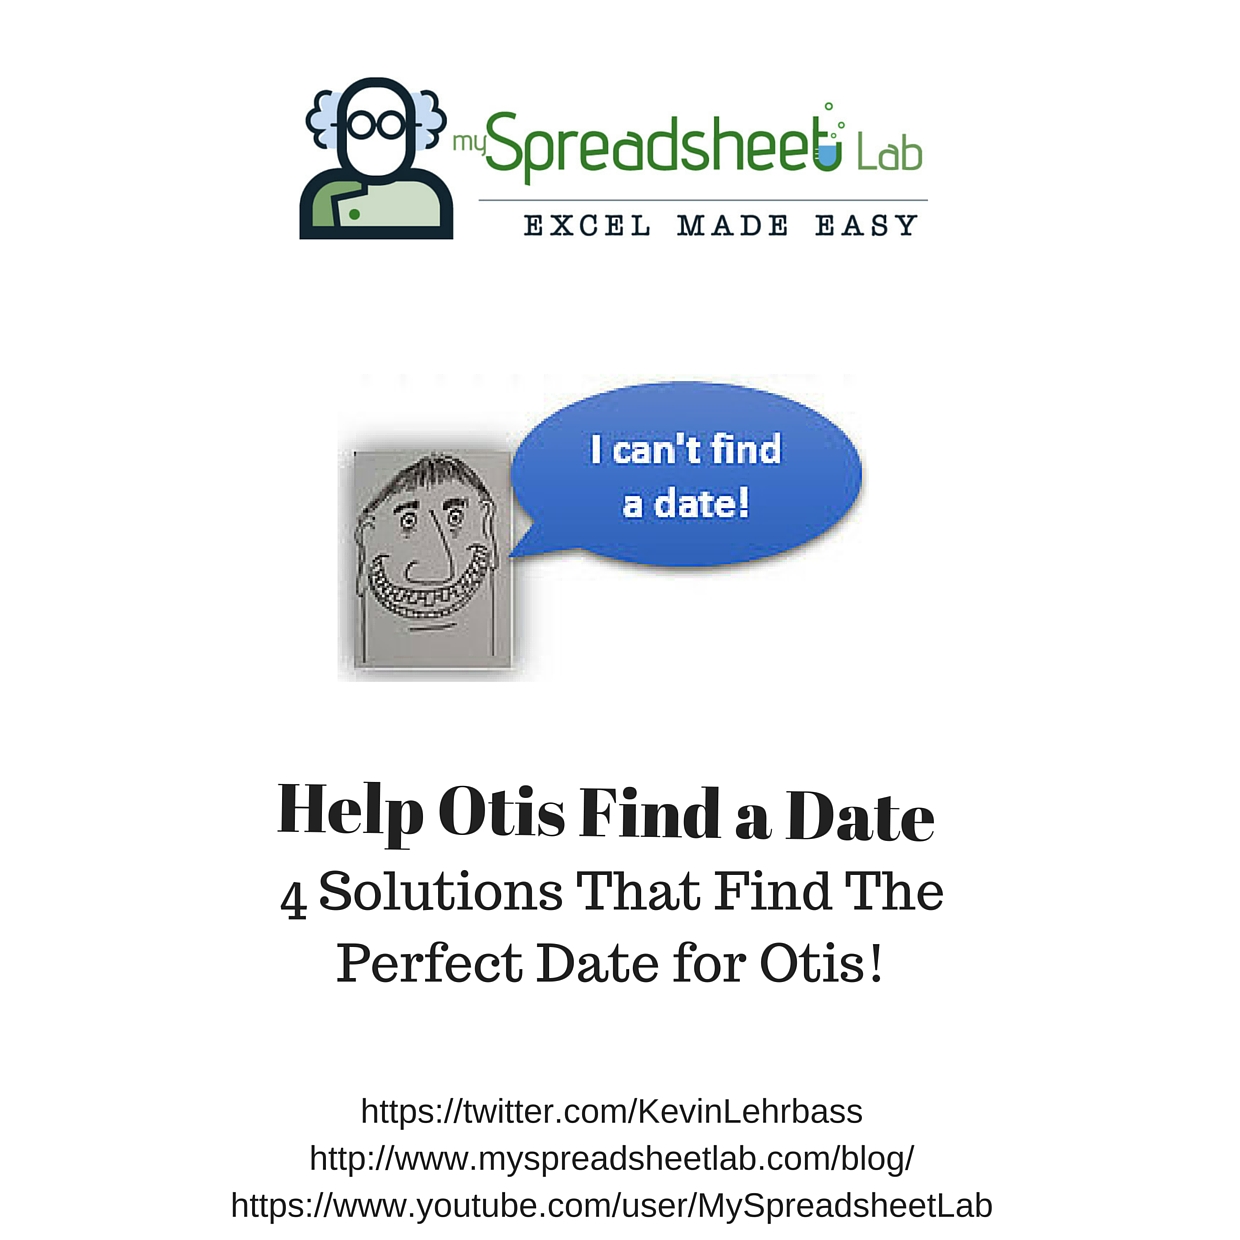 Otis Can’t Find a Date!